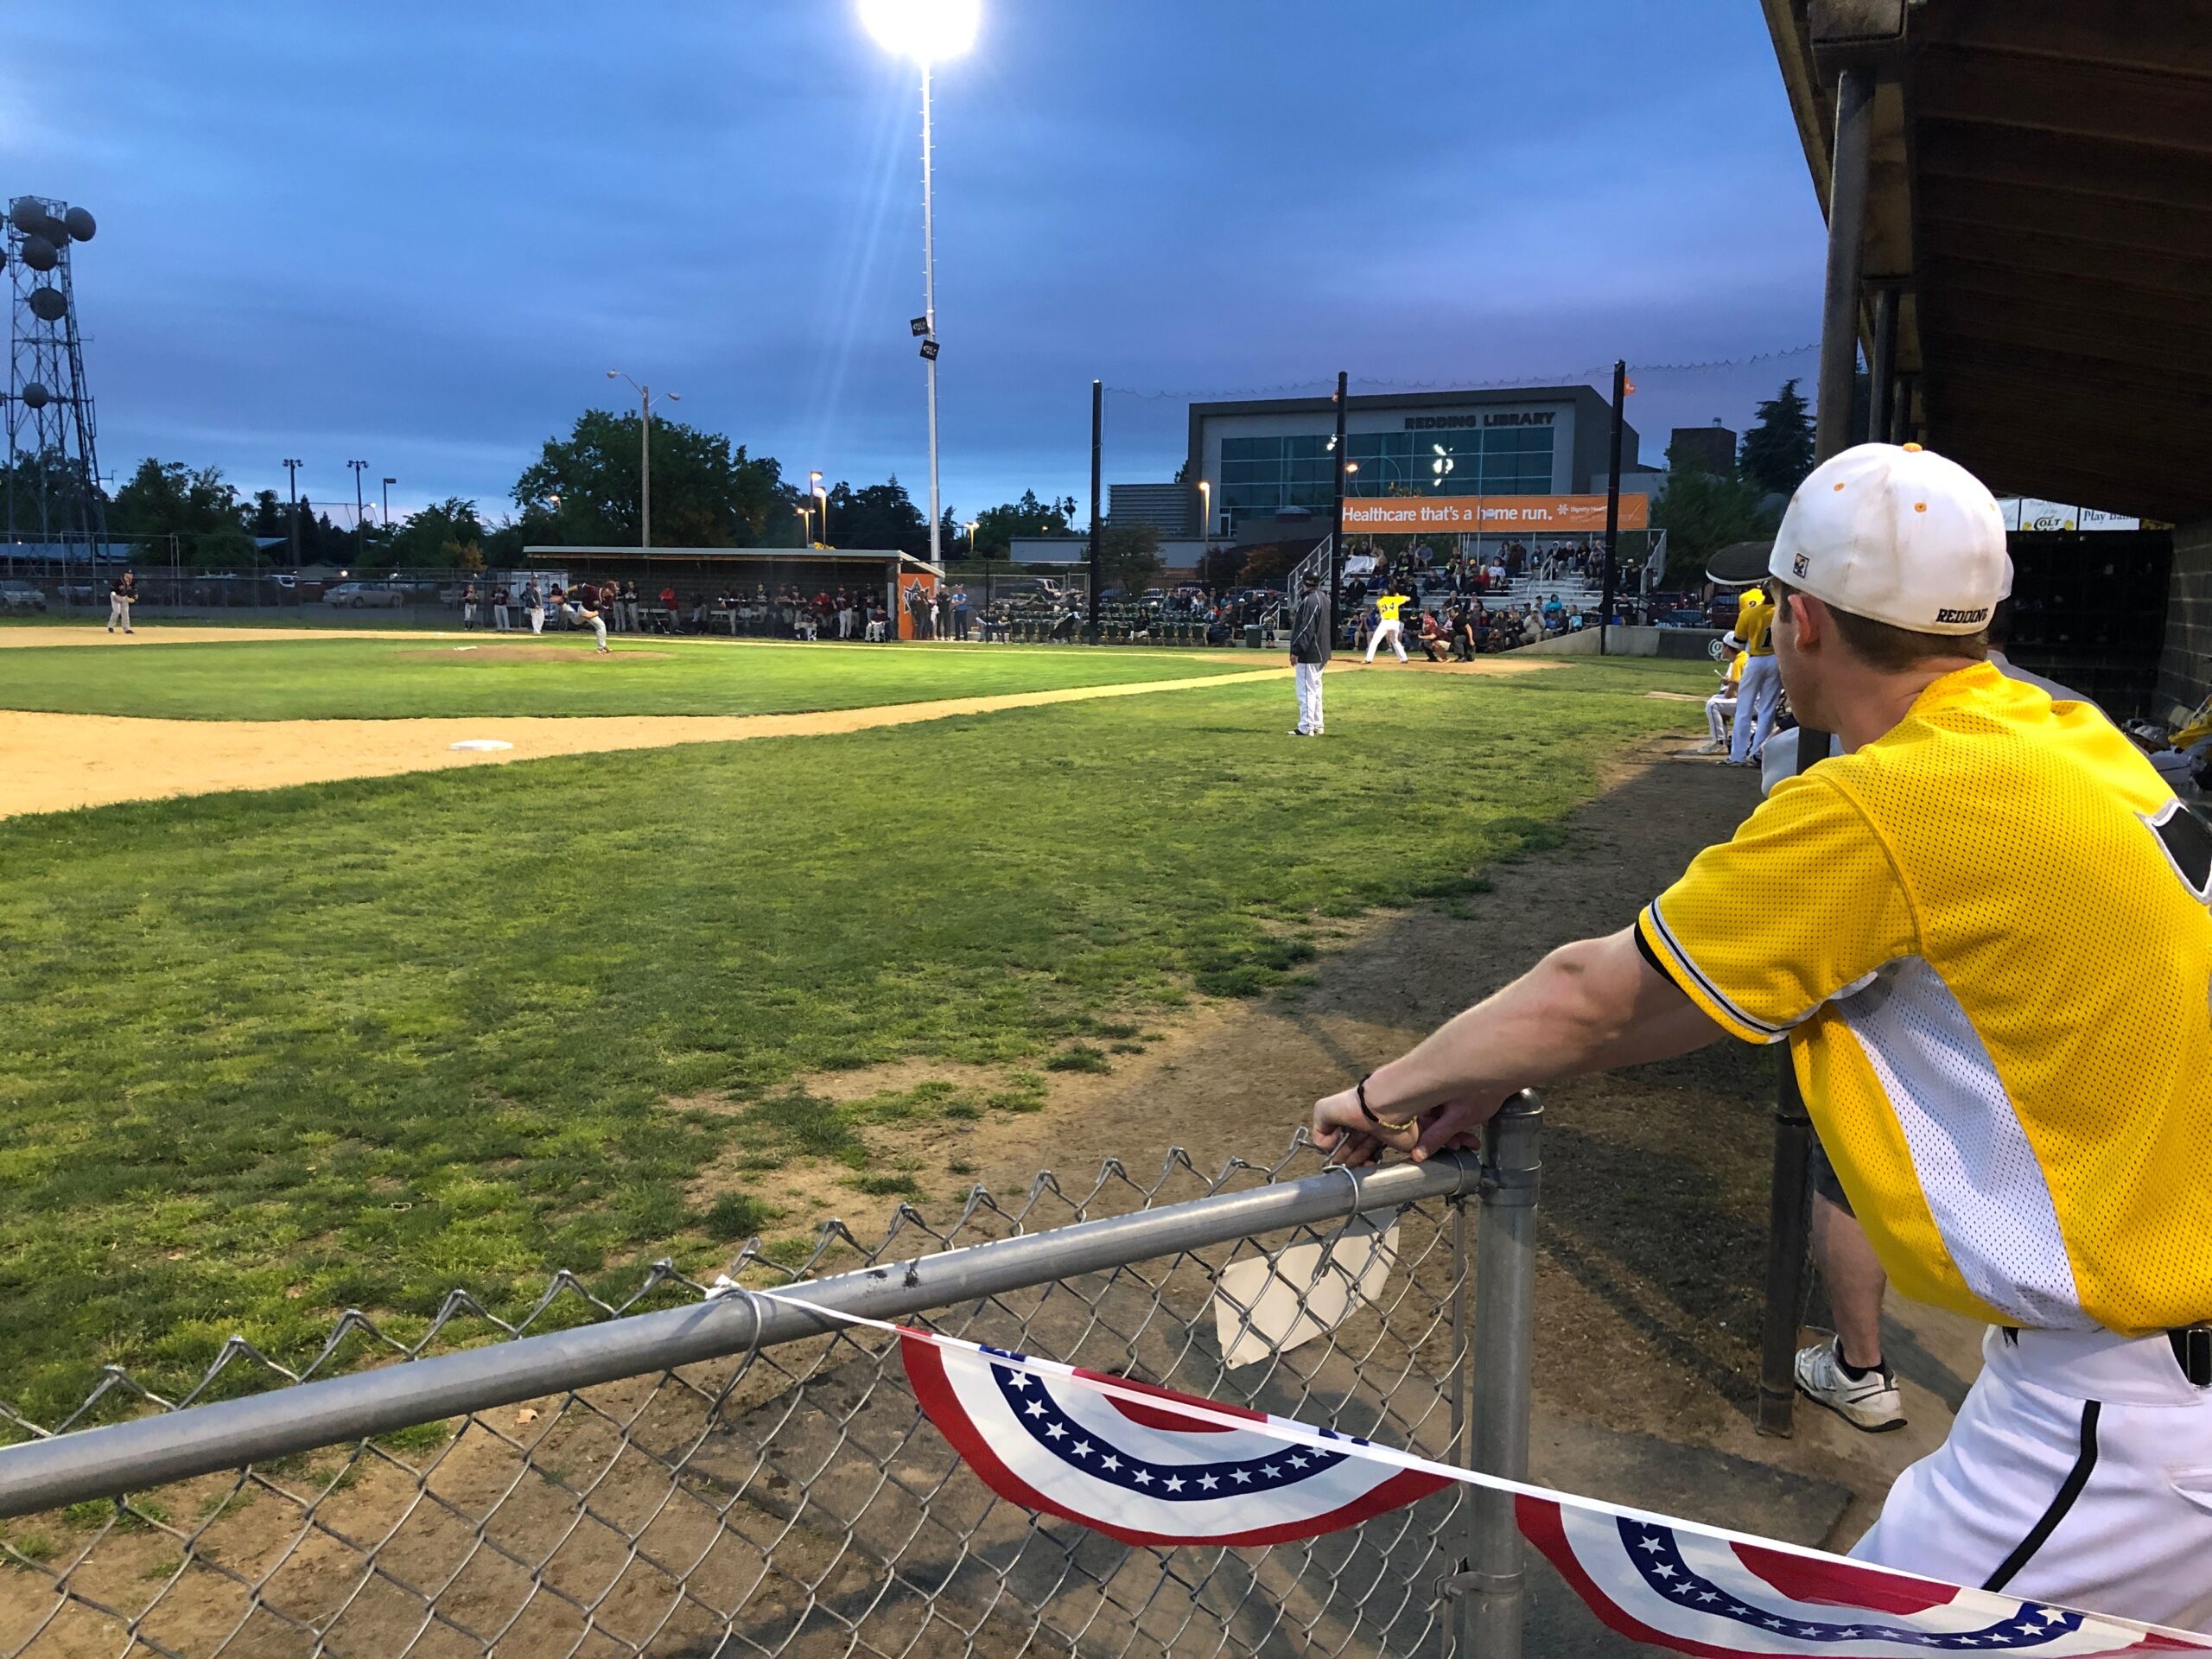 Colt 45s 2020 schedule promises excitement at Tiger Field